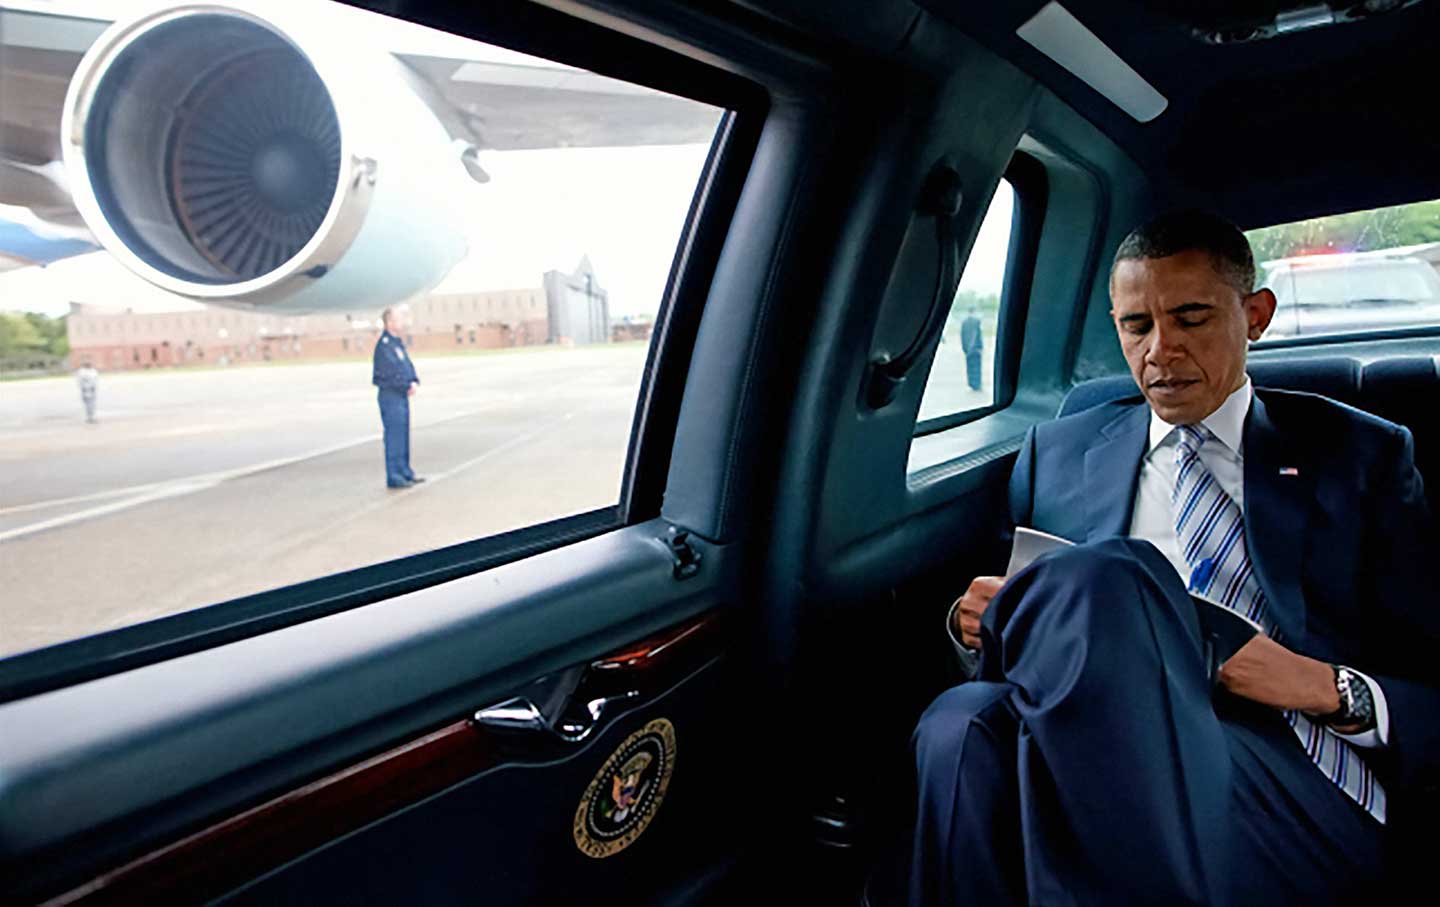 Obama From the Rearview Mirror